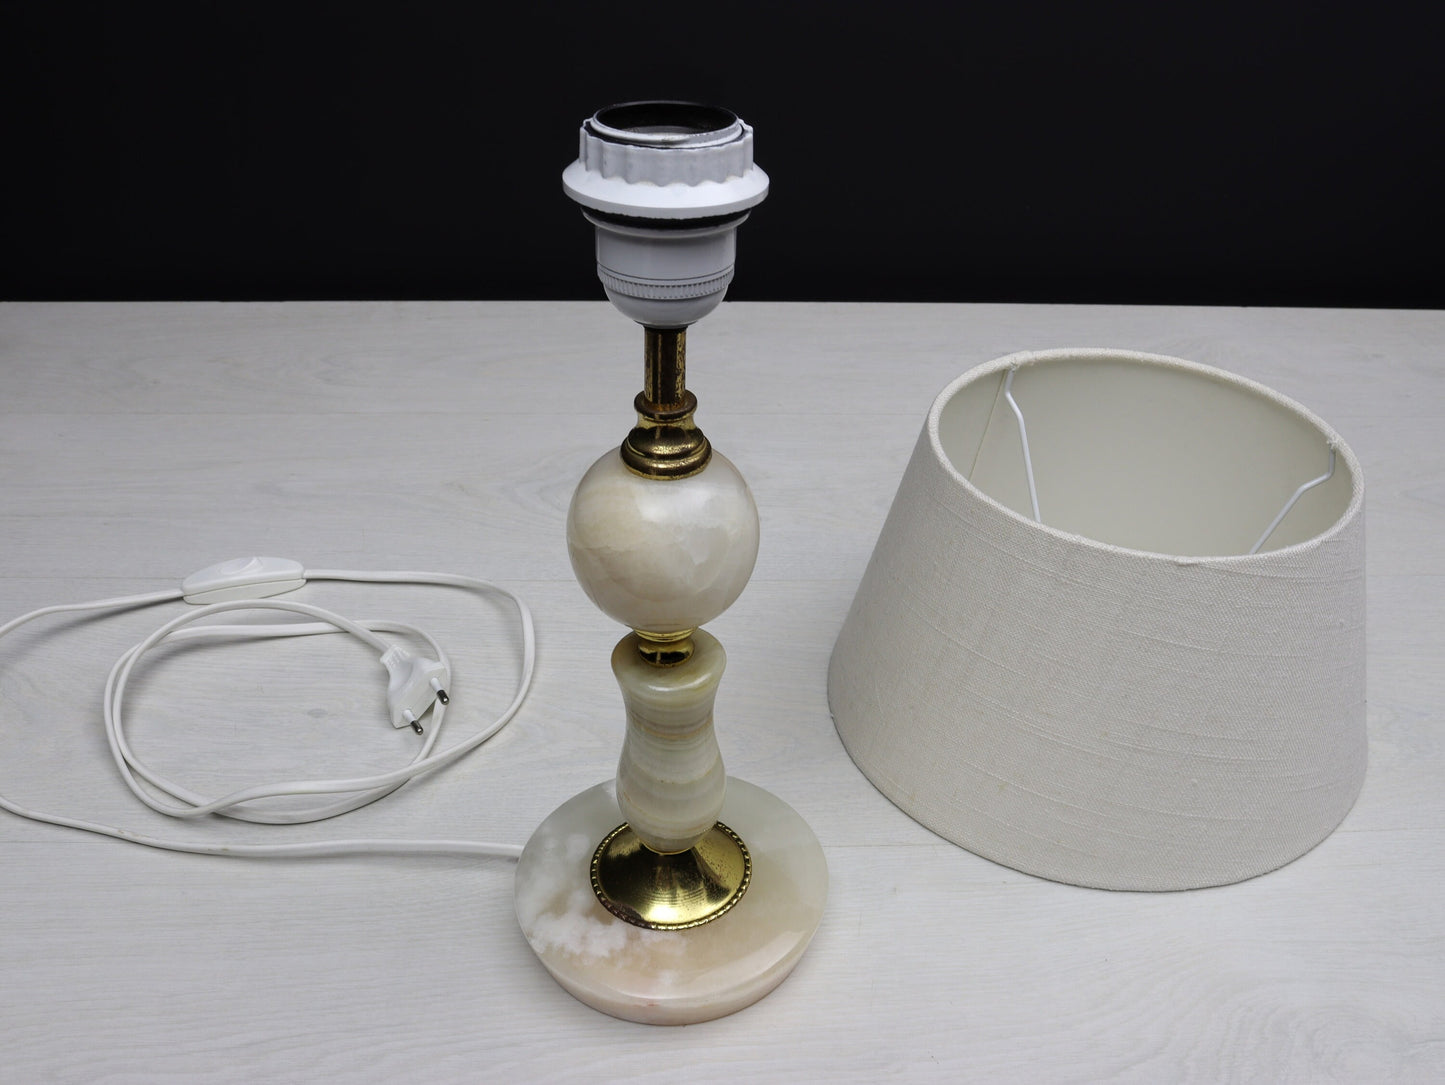 Elegant Vintage Lamp from Belgium: Ideal Bedside or Accent Lighting for Any Home Decor Style